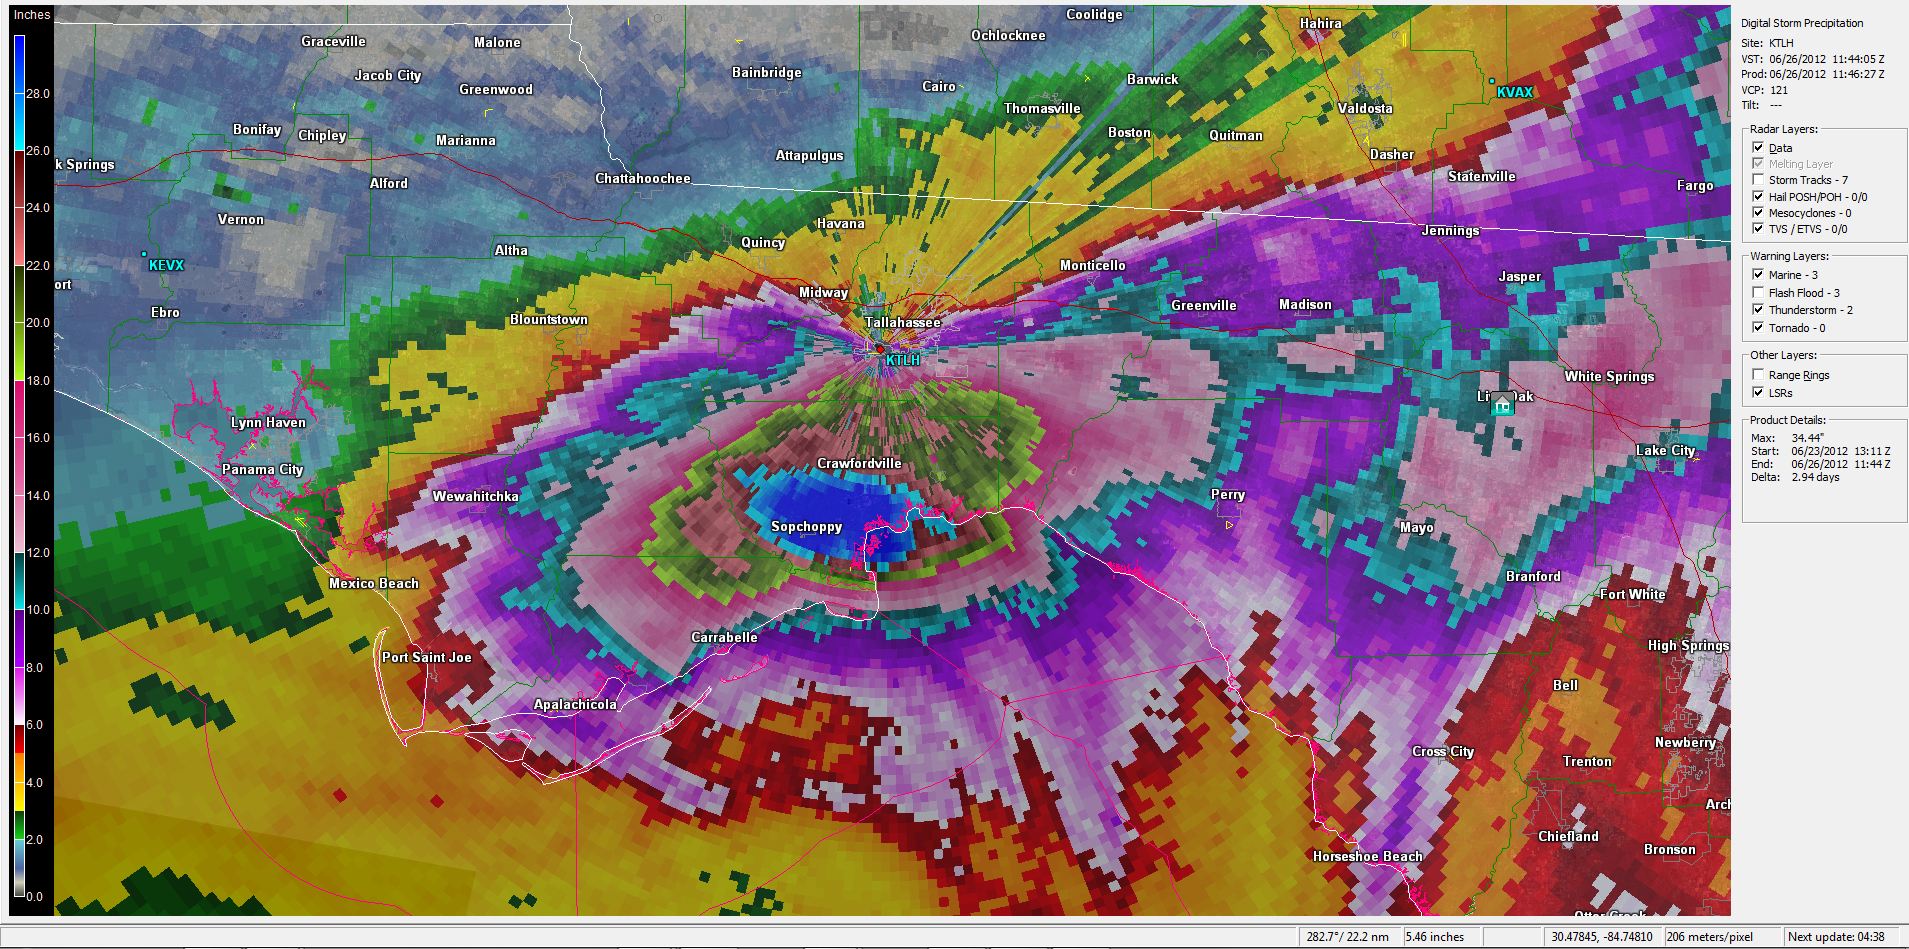 Storm-total rainfall estimates from the KTLH radar for Tropical Storm Debby showing maximum amounts exceeding 28 inches (dark blue) across soutwestern portions of Wakulla County.